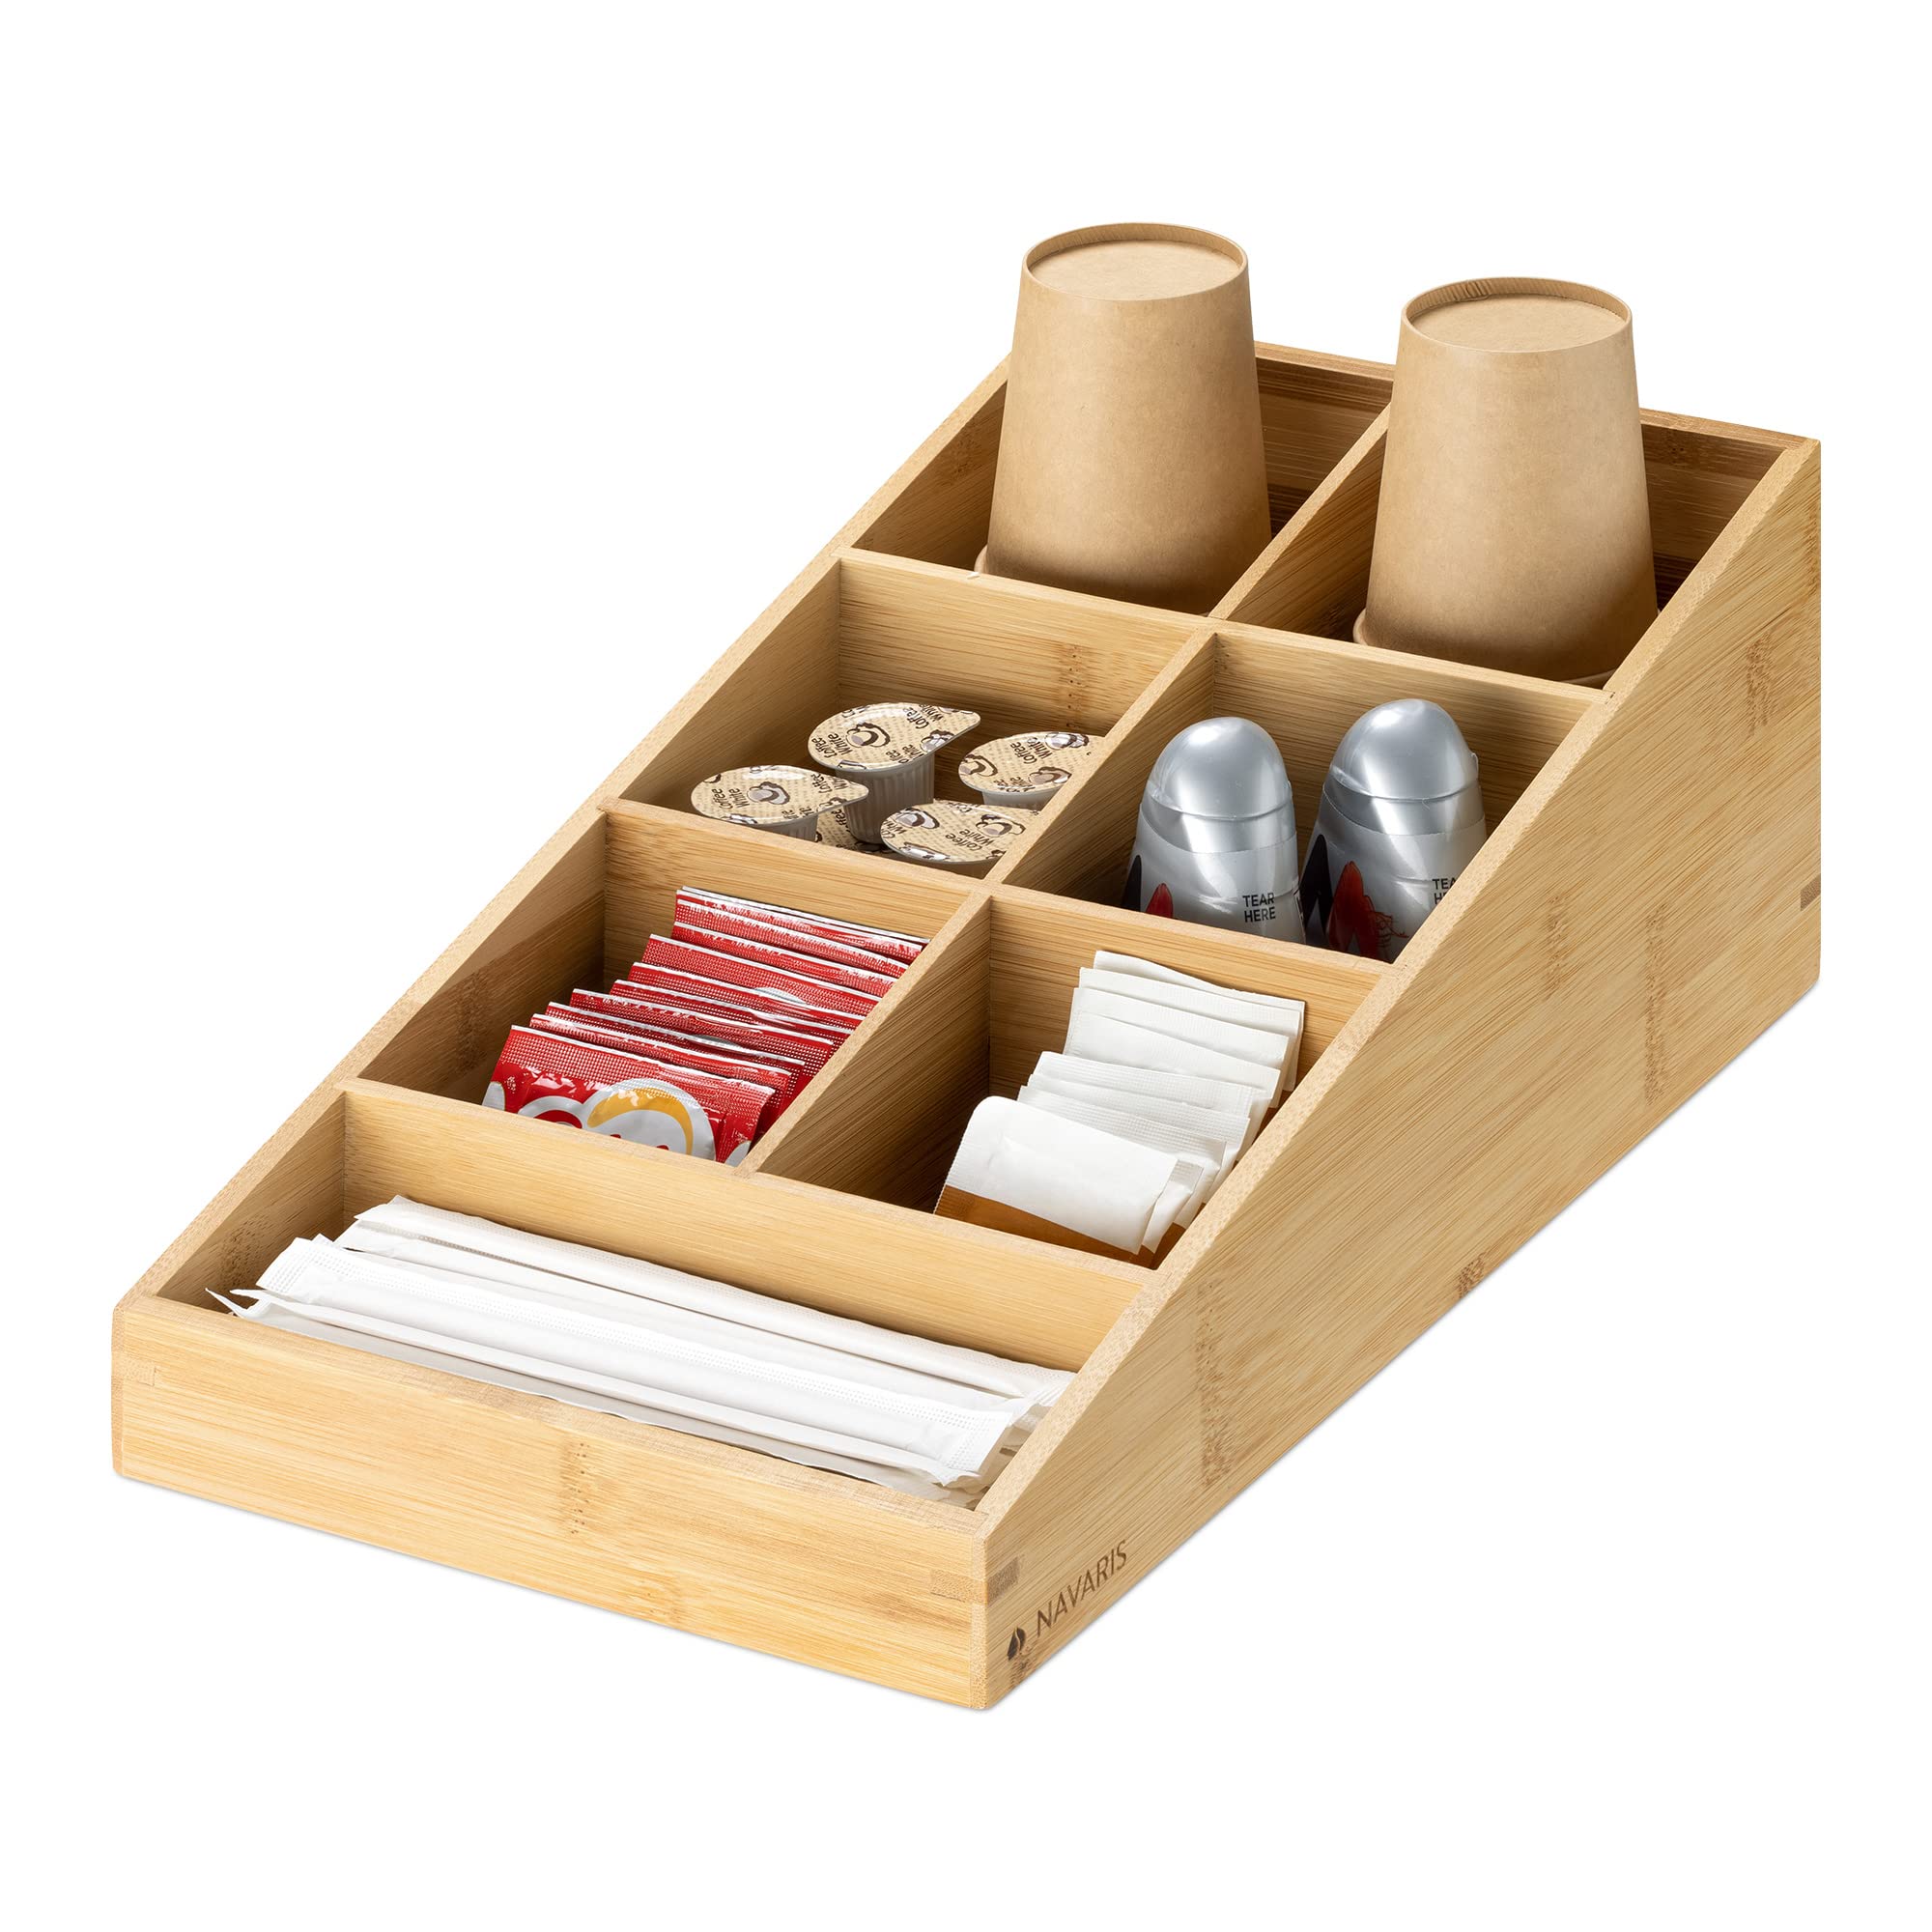 Navaris Coffee and Tea Station - Bamboo Organiser Station Caddy for Coffee and Tea Condiment Accessories Office Home Kitchen Bar - 7 Compartments